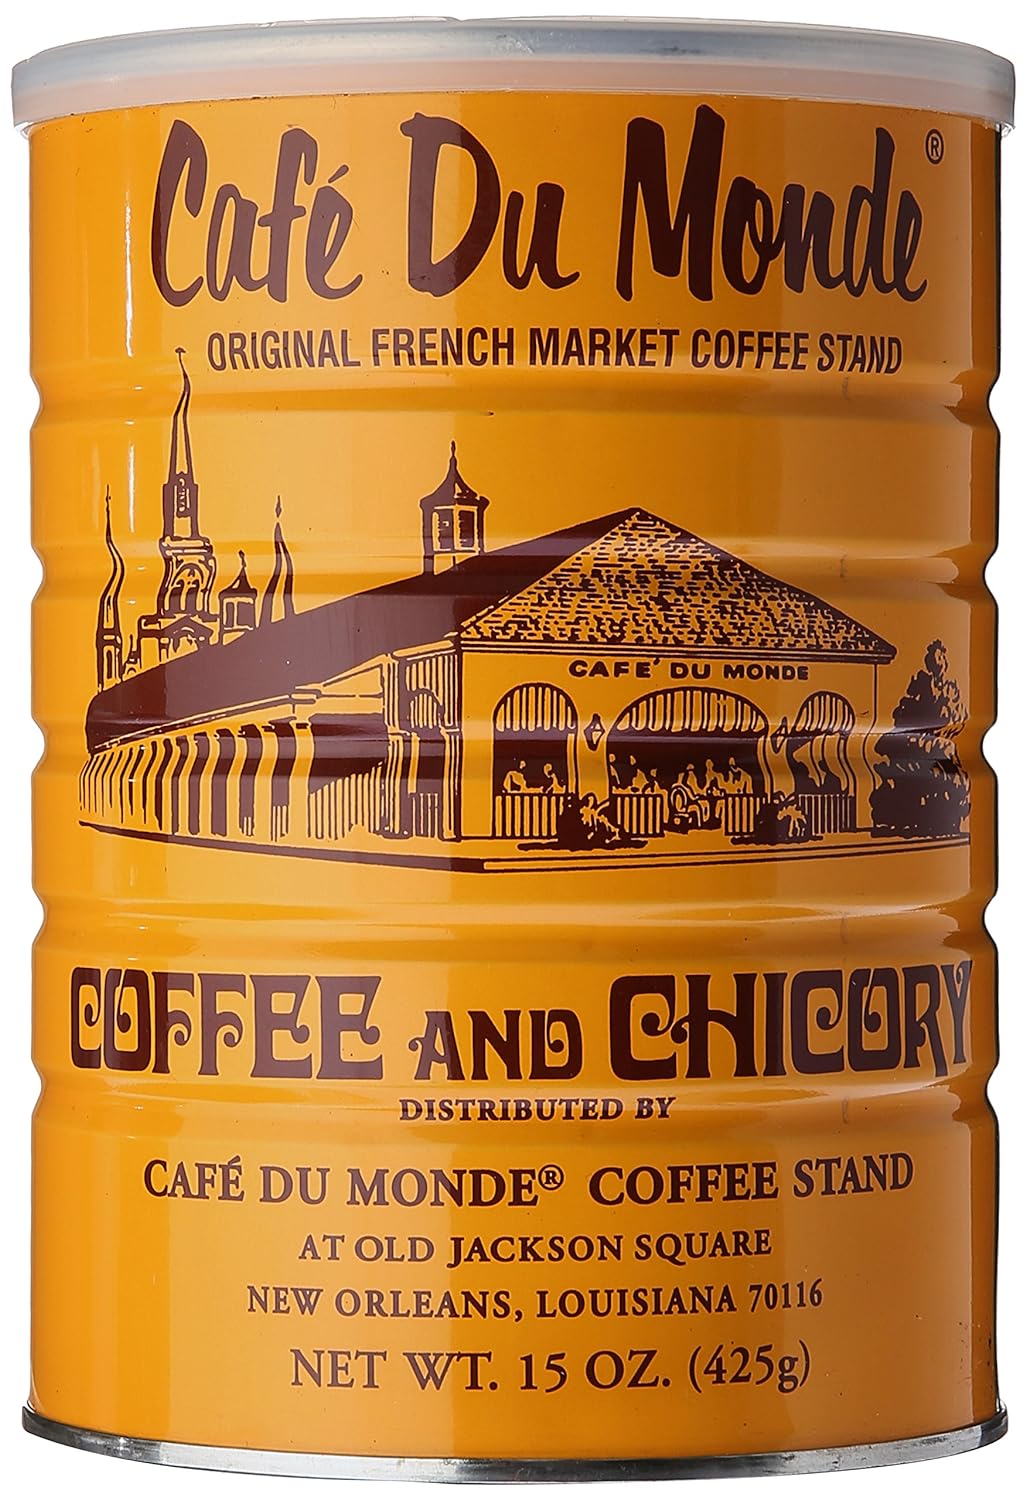 The flavor is different and a nice change from straight coffee. It arrived as promised and was fresh. Paired with the beignets, it makes a nice gift or a nice treat for a gathering.